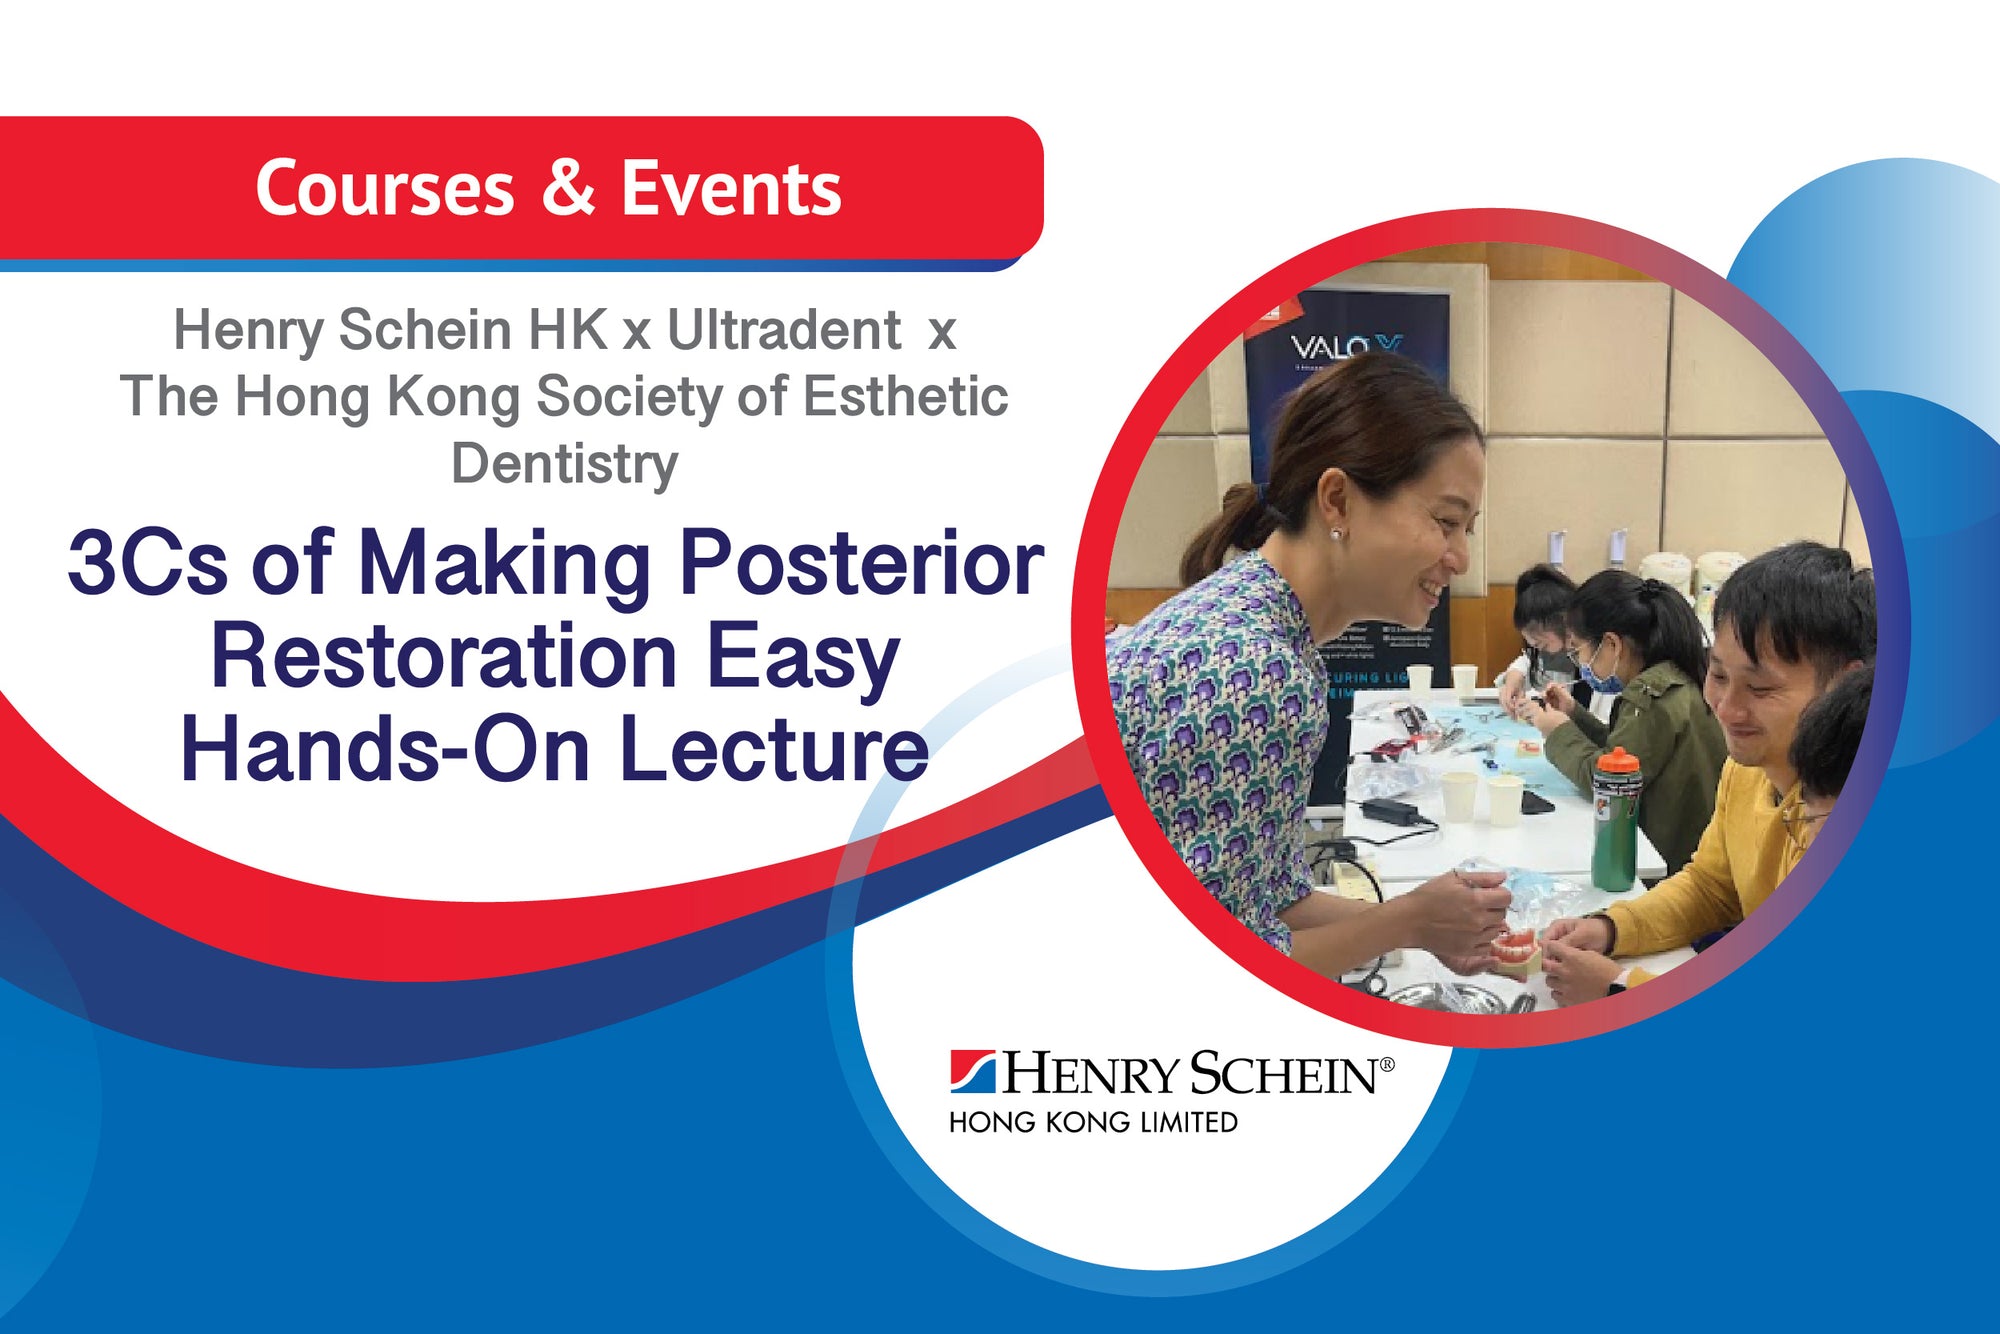 Henry Schein, Ultradent and The Hong Kong Society of Esthetic Dentistry Hosts Lecture and Hands-On on 3Cs of Making Posterior Restoration Easy